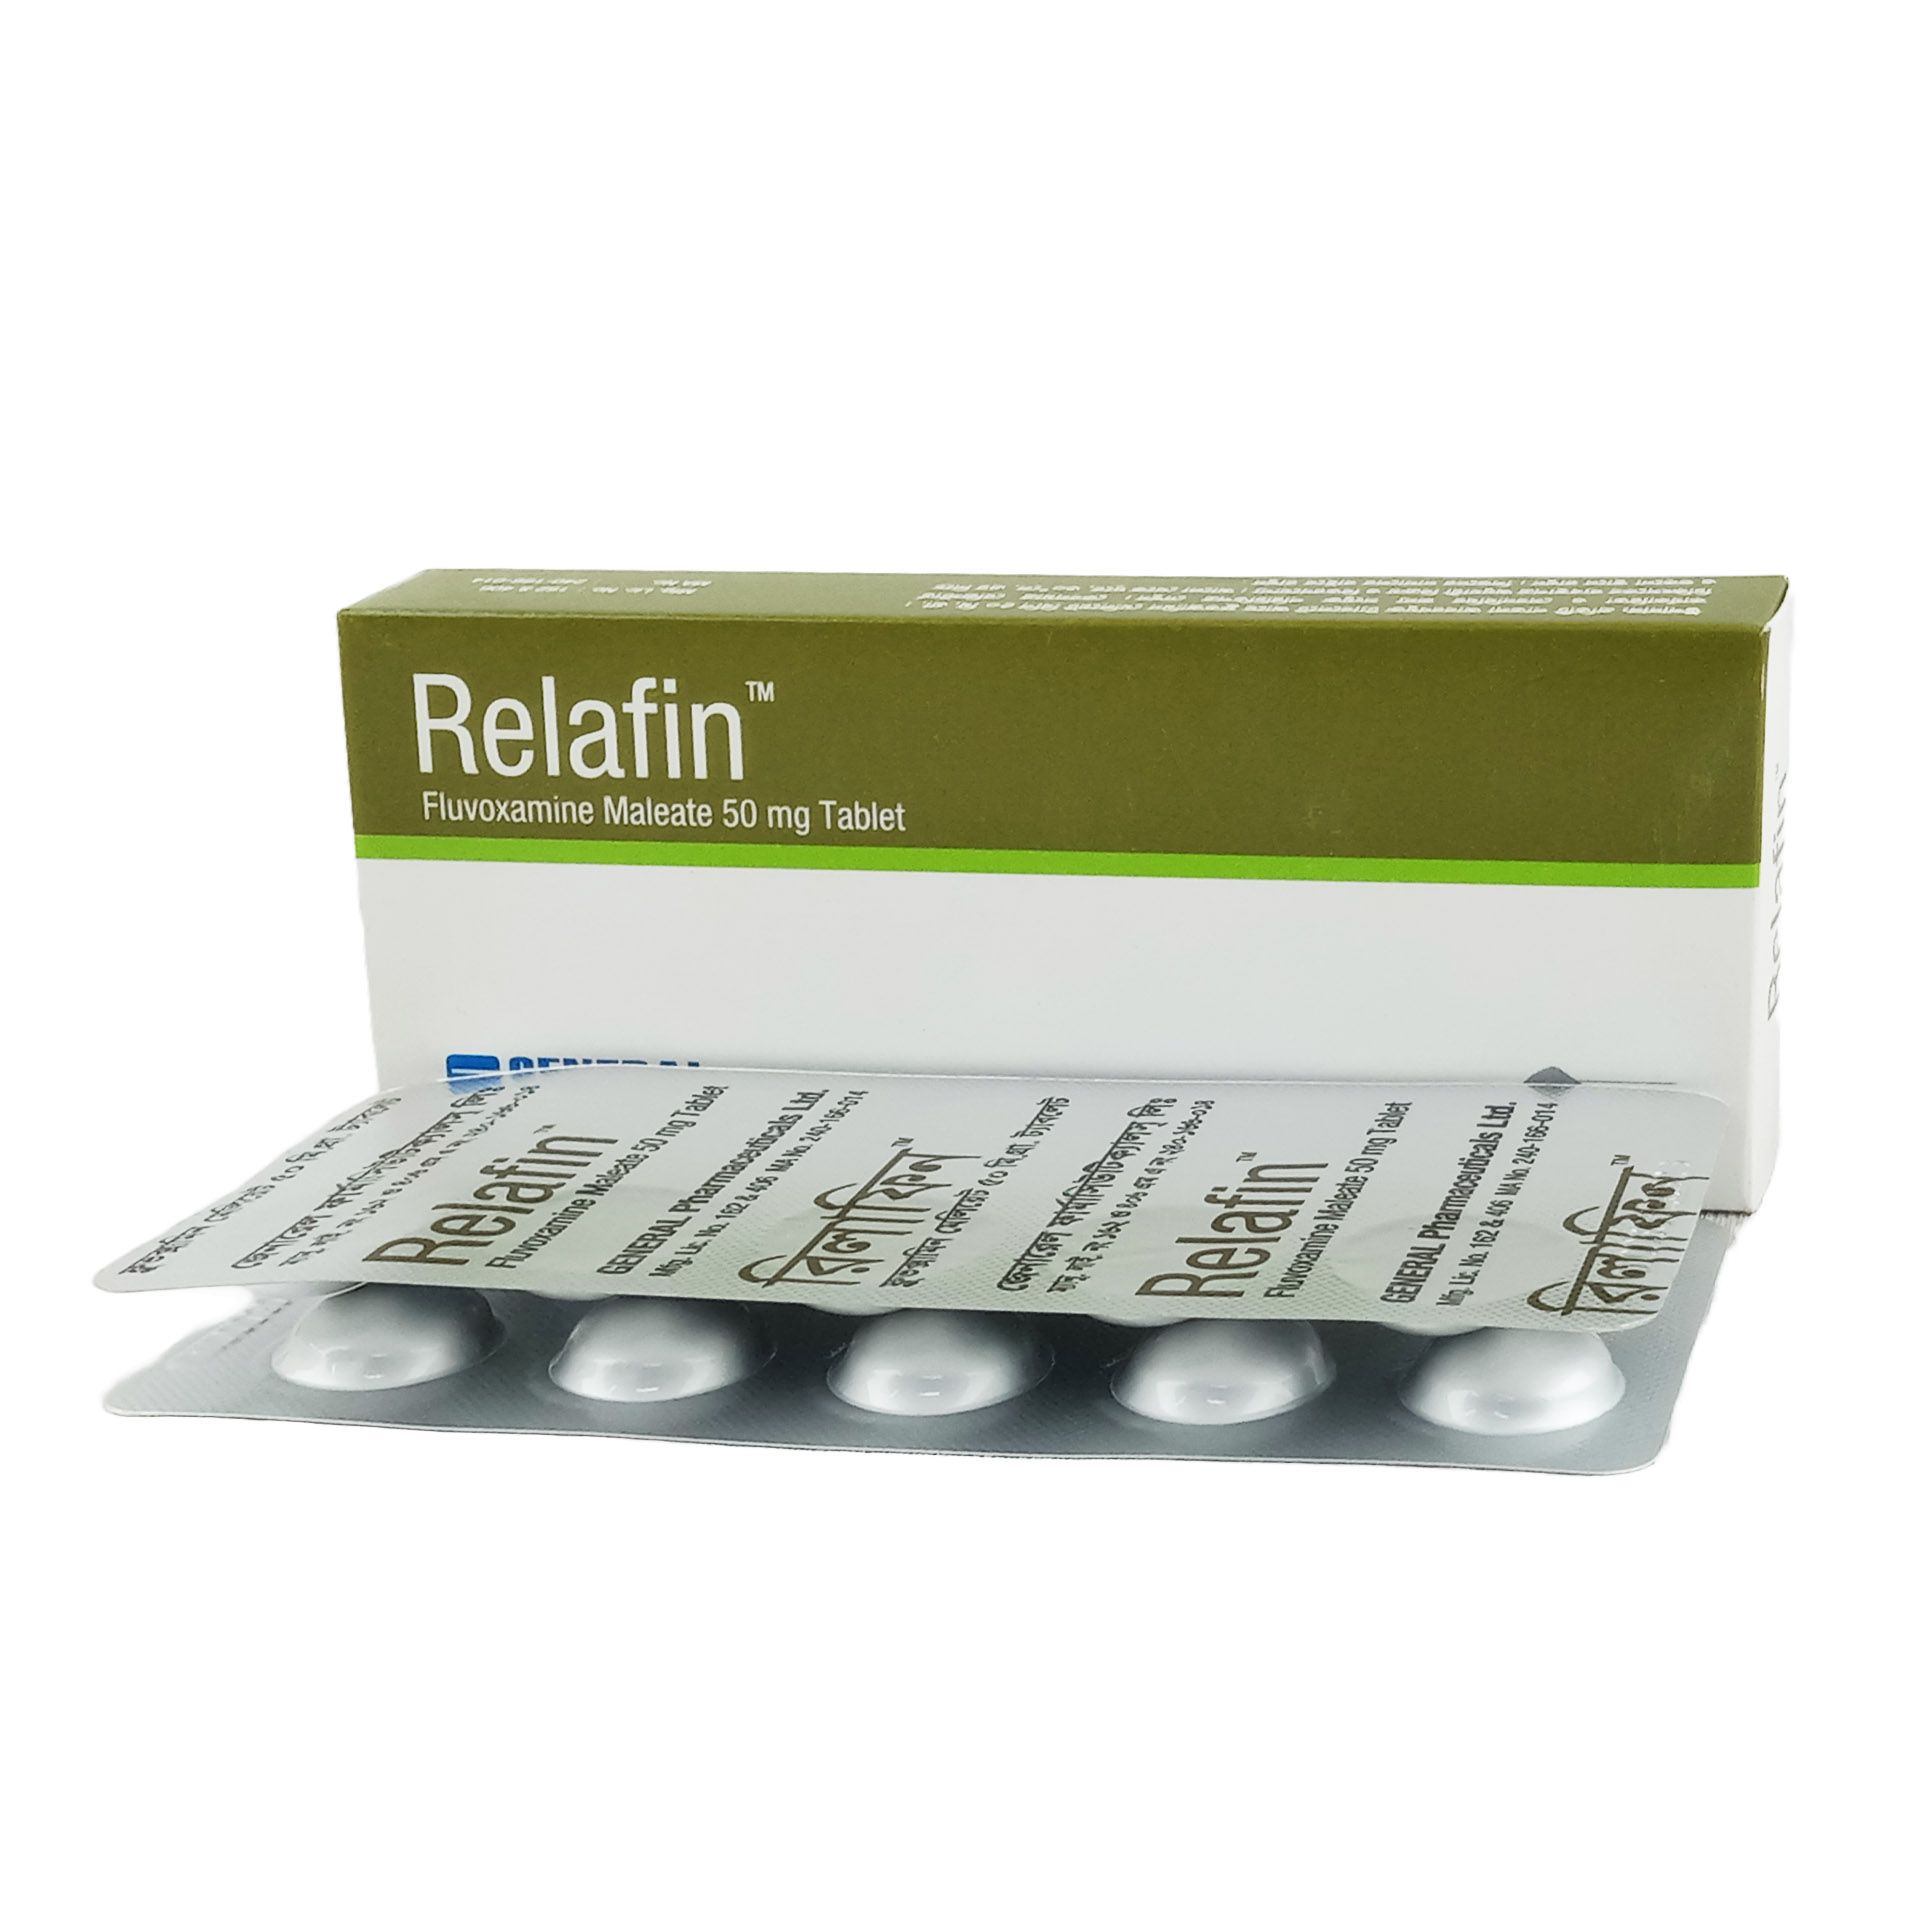 Relafin 50mg Tablet